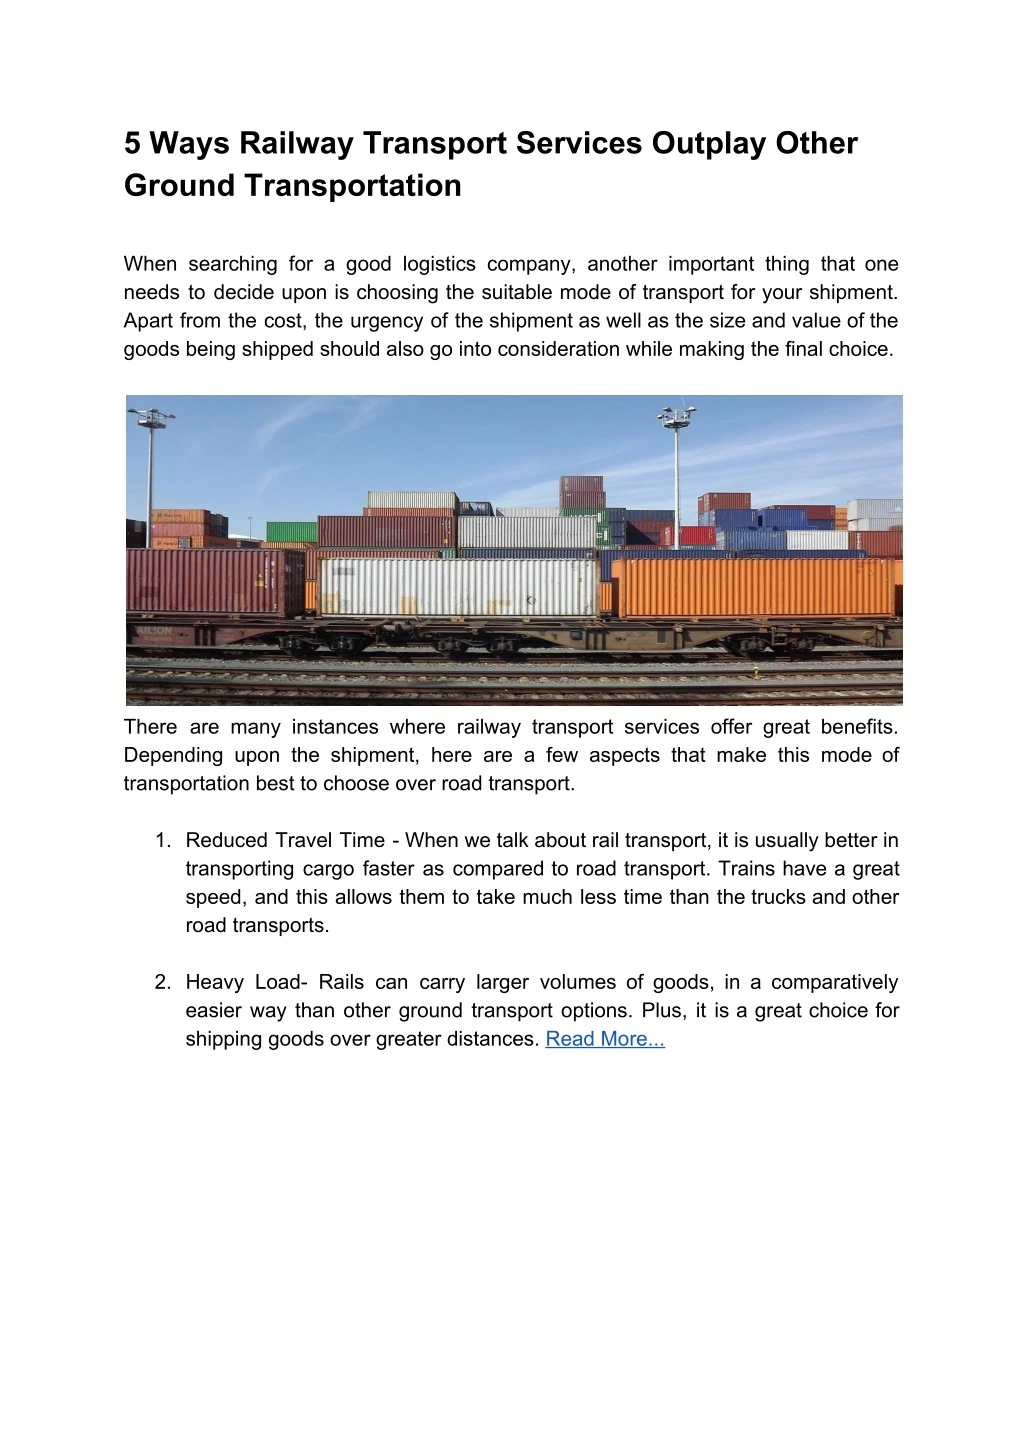 5 ways railway transport services outplay other